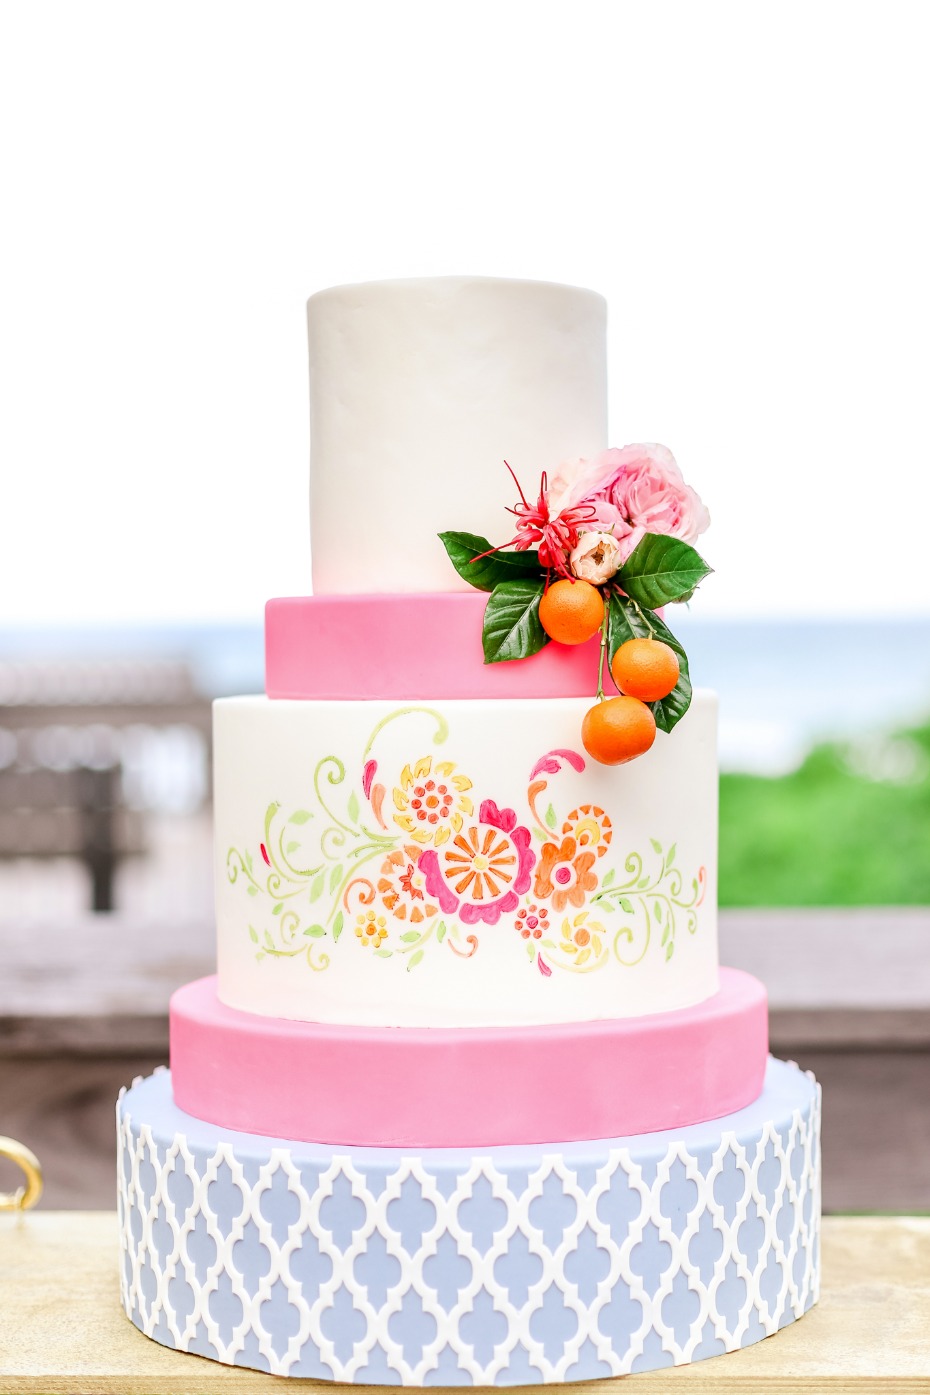 Bright and cheerful cake with pink, blue and white